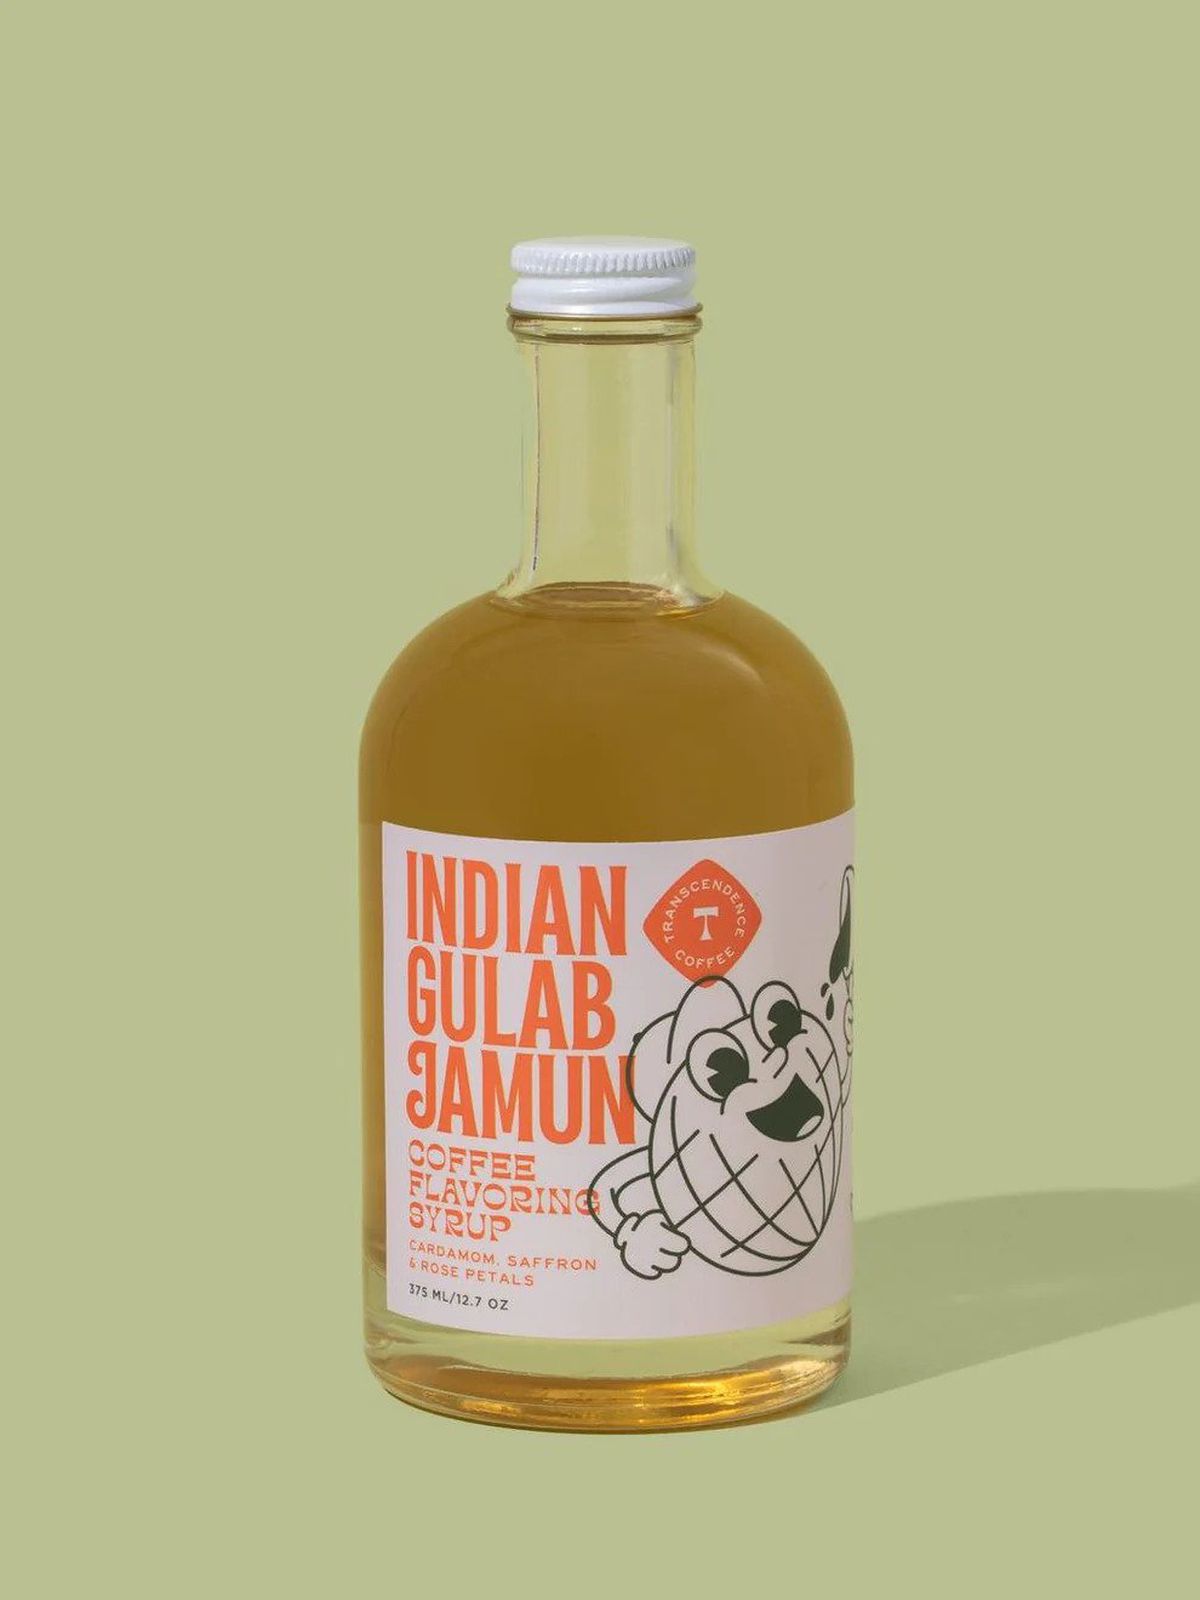 A bottle of Indian Gulab Jamun syrup